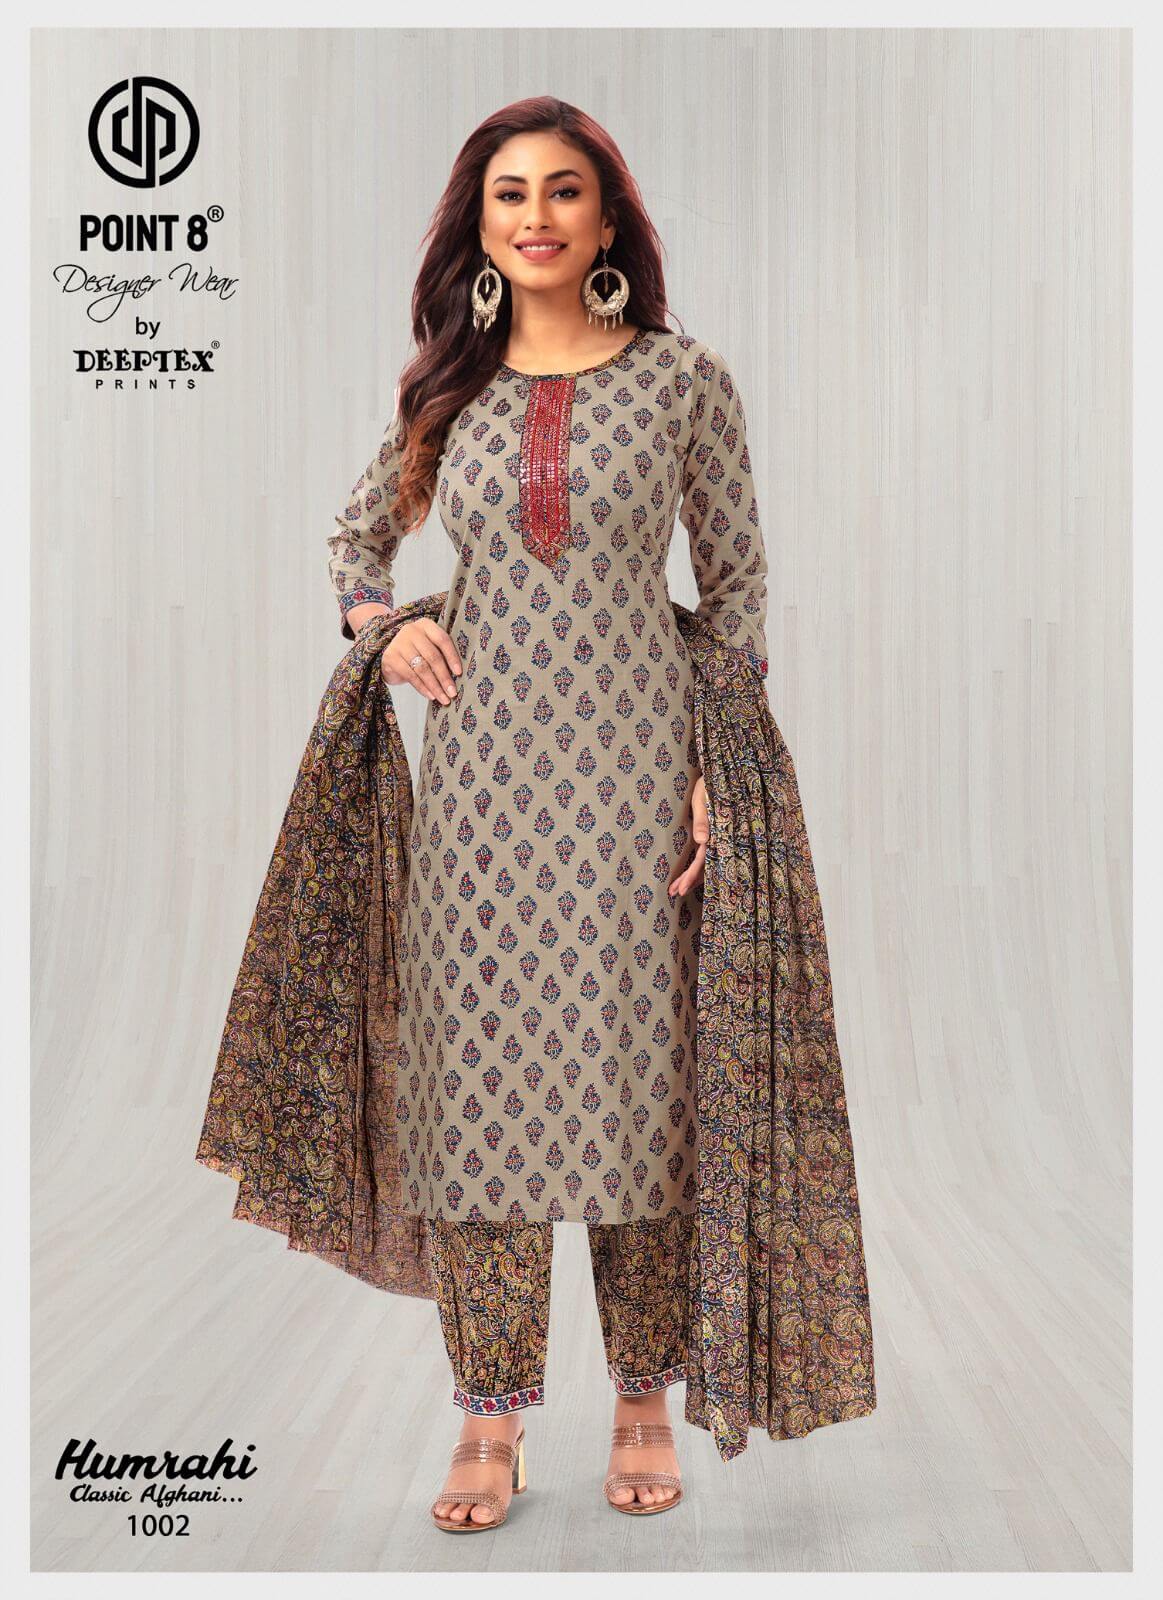 Deeptex Point 8 Humrahi vol 1 collection 3